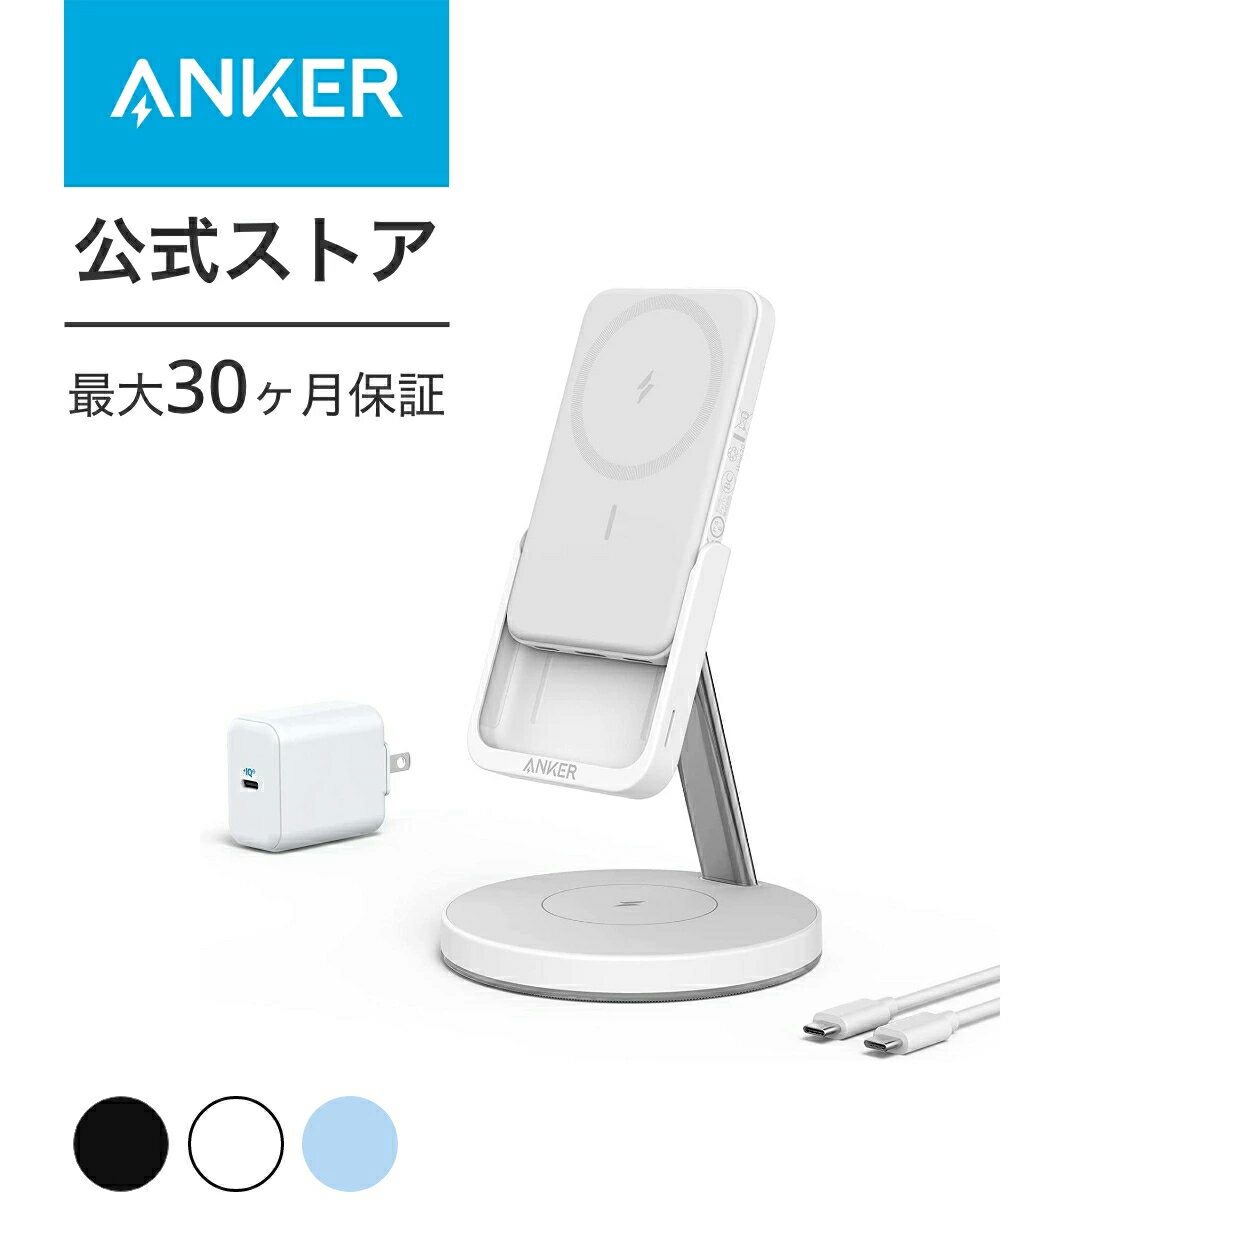 Anker 633 Magnetic Wireless Charger (MagGo)(マグネット式 2-in-1 ワイヤレス充電ステーション)【モバイルバッテリ…